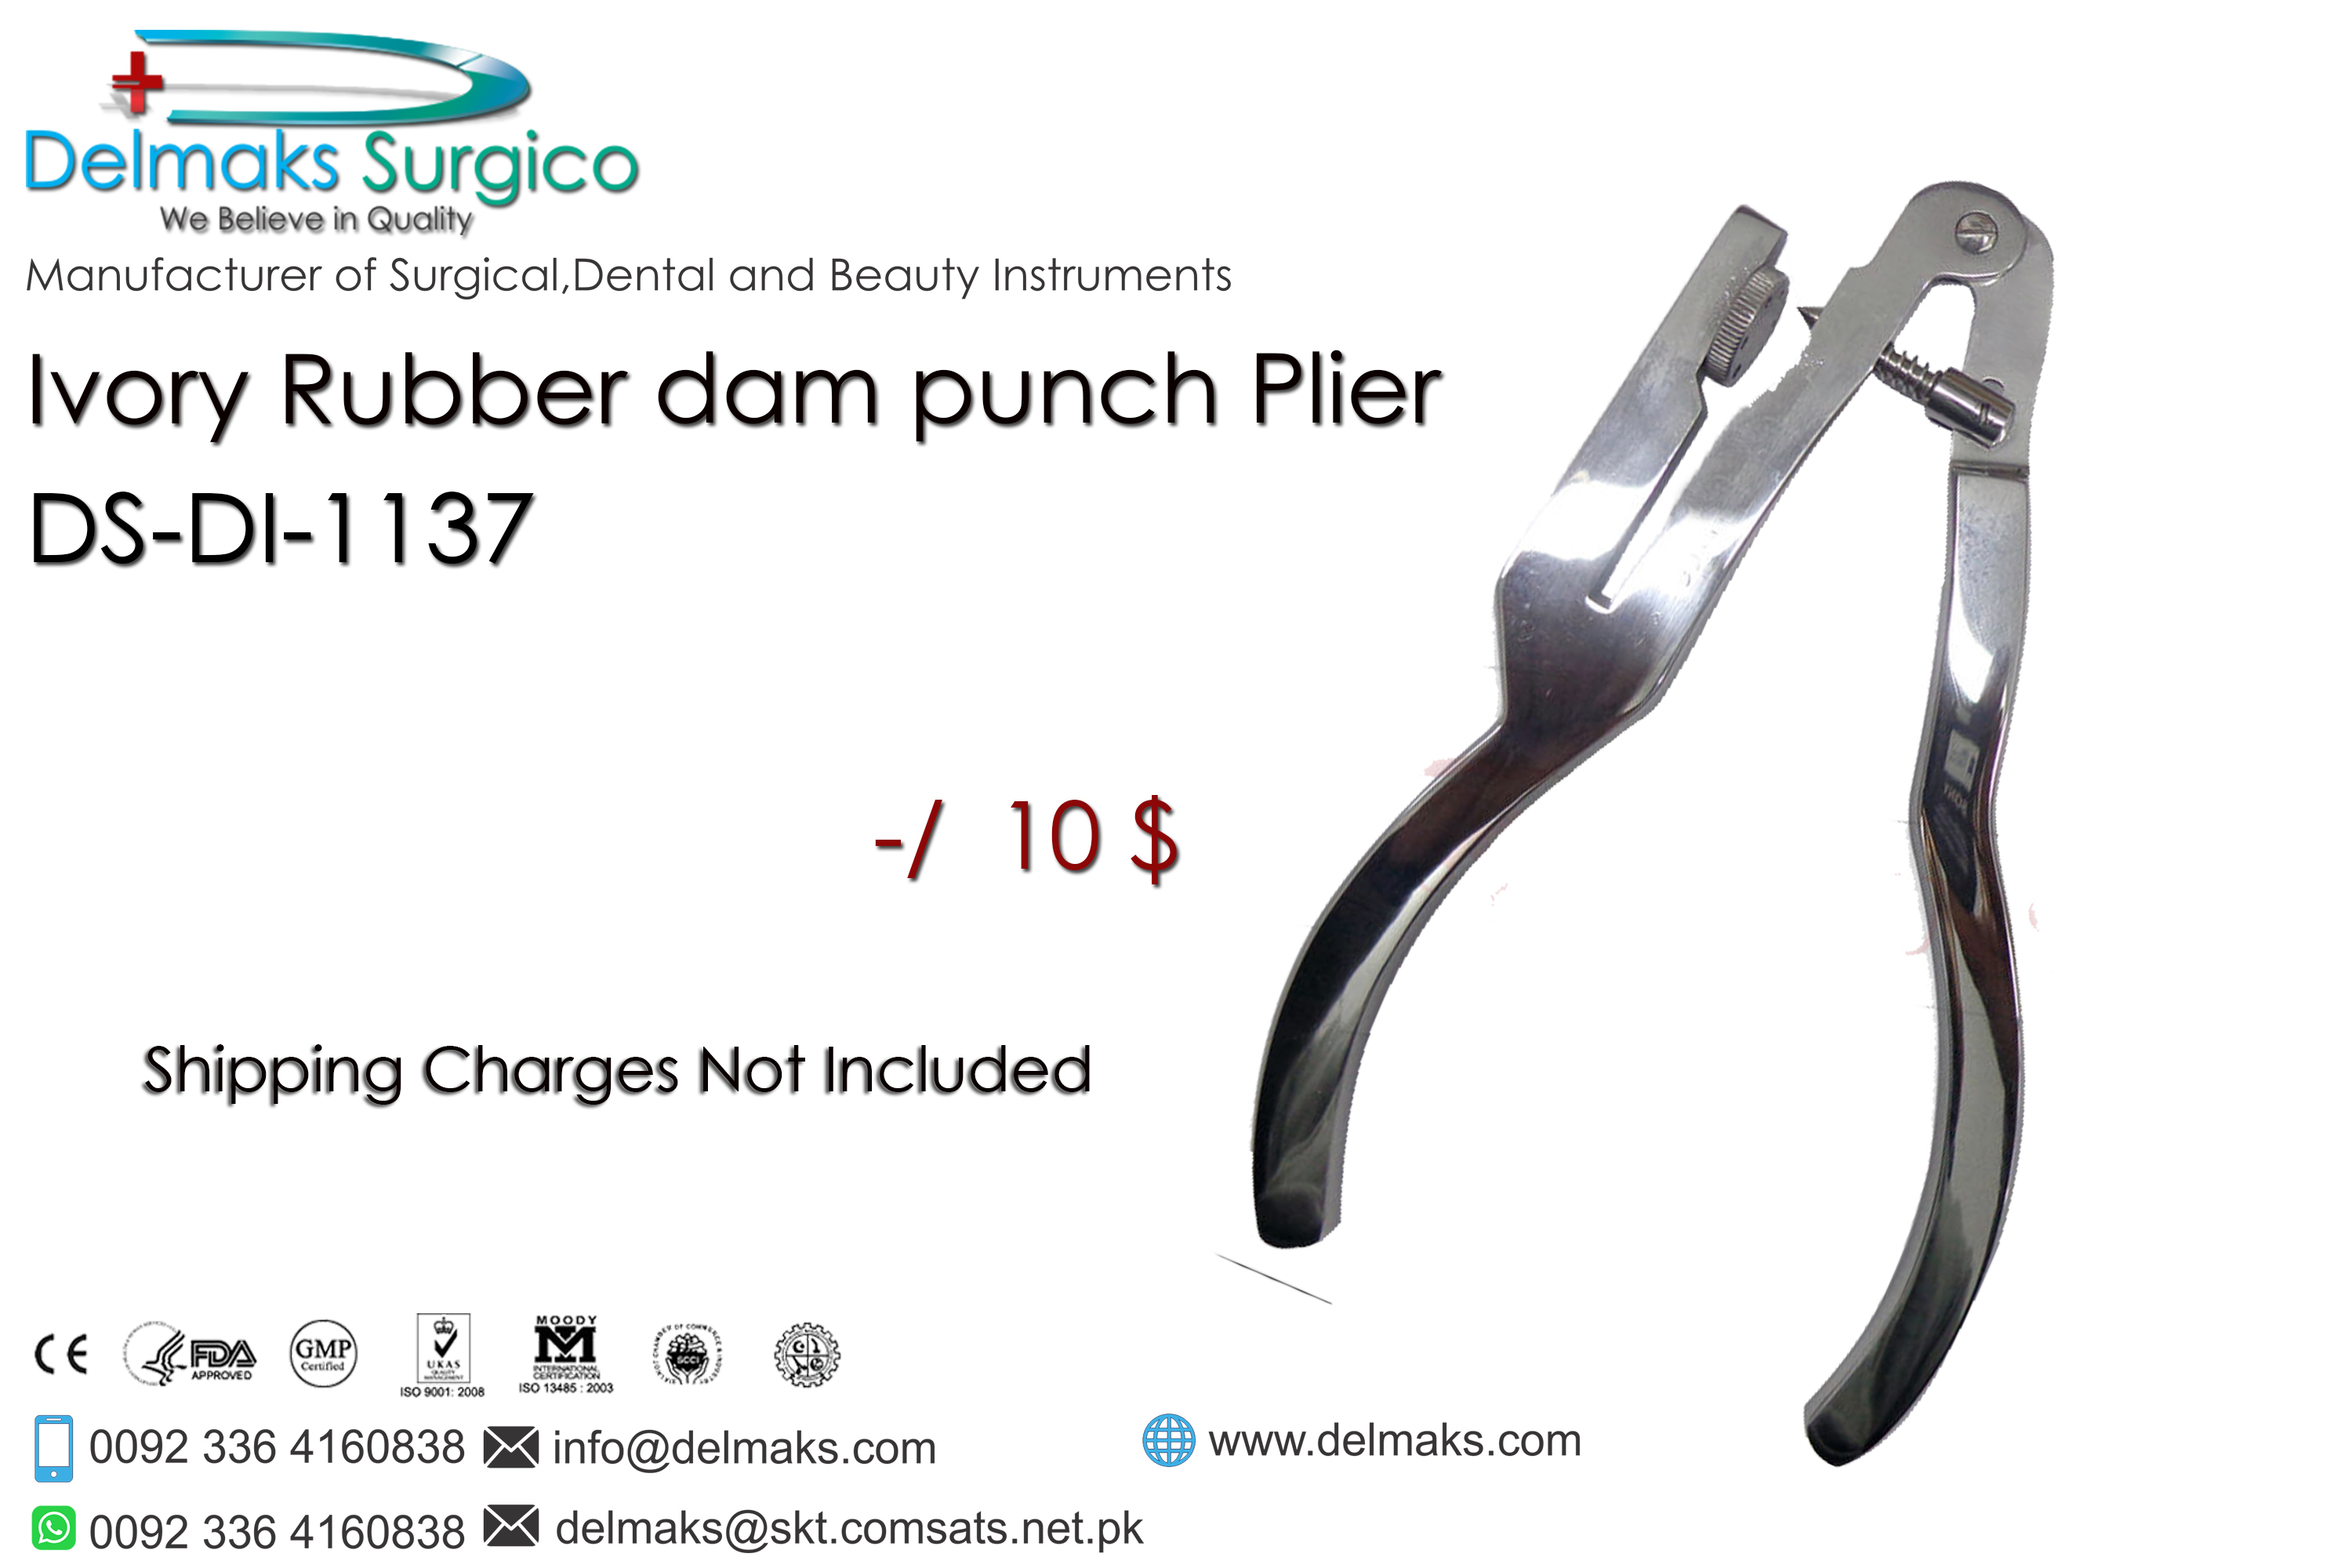 Ivory Rubber Dam Punch Plier-Rubber Dam Instruments-Dental Implants-Crown Instruments-Orthodontics-Syringes-Orthodontic Pliers-Instruments-Dental Instruments-Extracting Forceps-Delmaks Surgico-Dental 